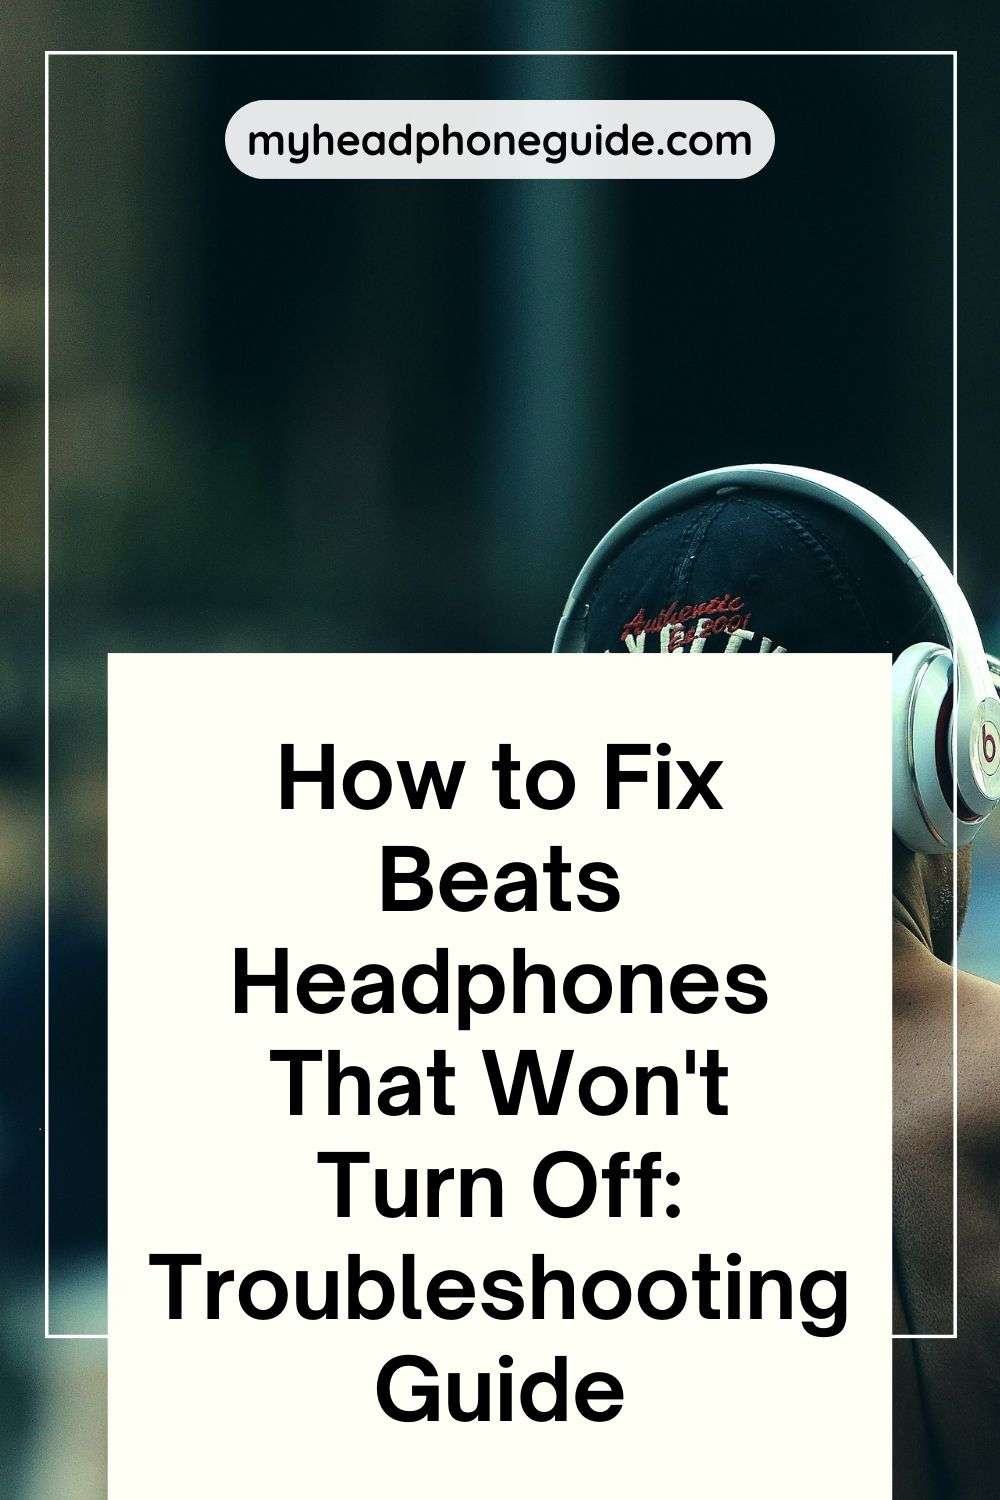 How to Fix Beats Headphones That Won't Turn Off: Troubleshooting Guide